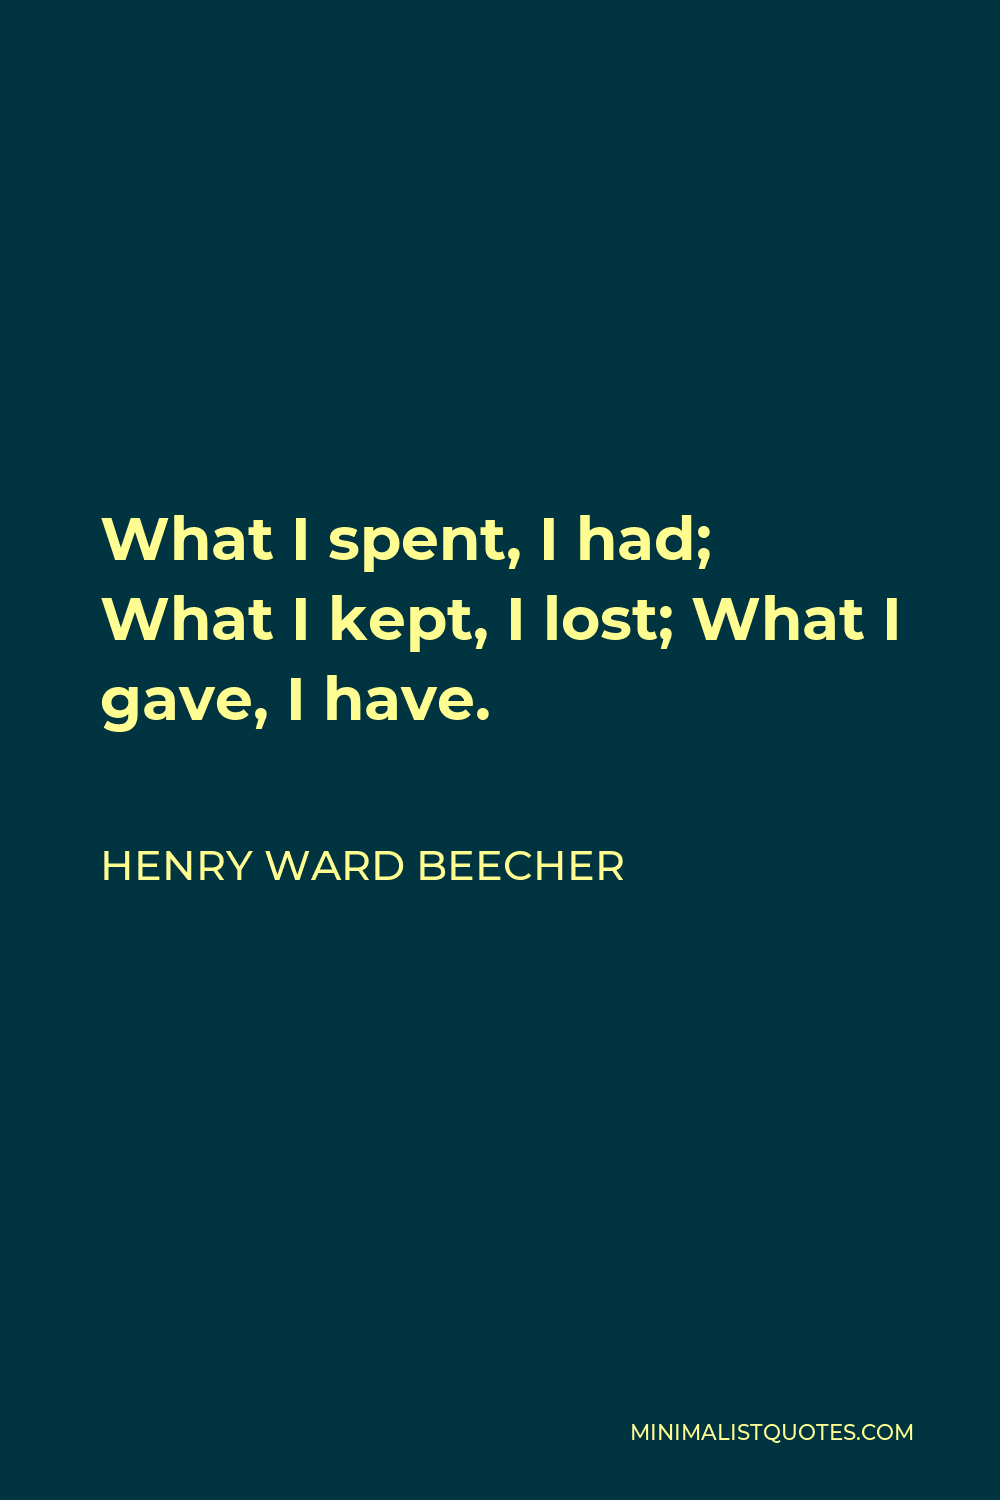 Henry Ward Beecher Quote - What I spent, I had; What I kept, I lost; What I gave, I have.